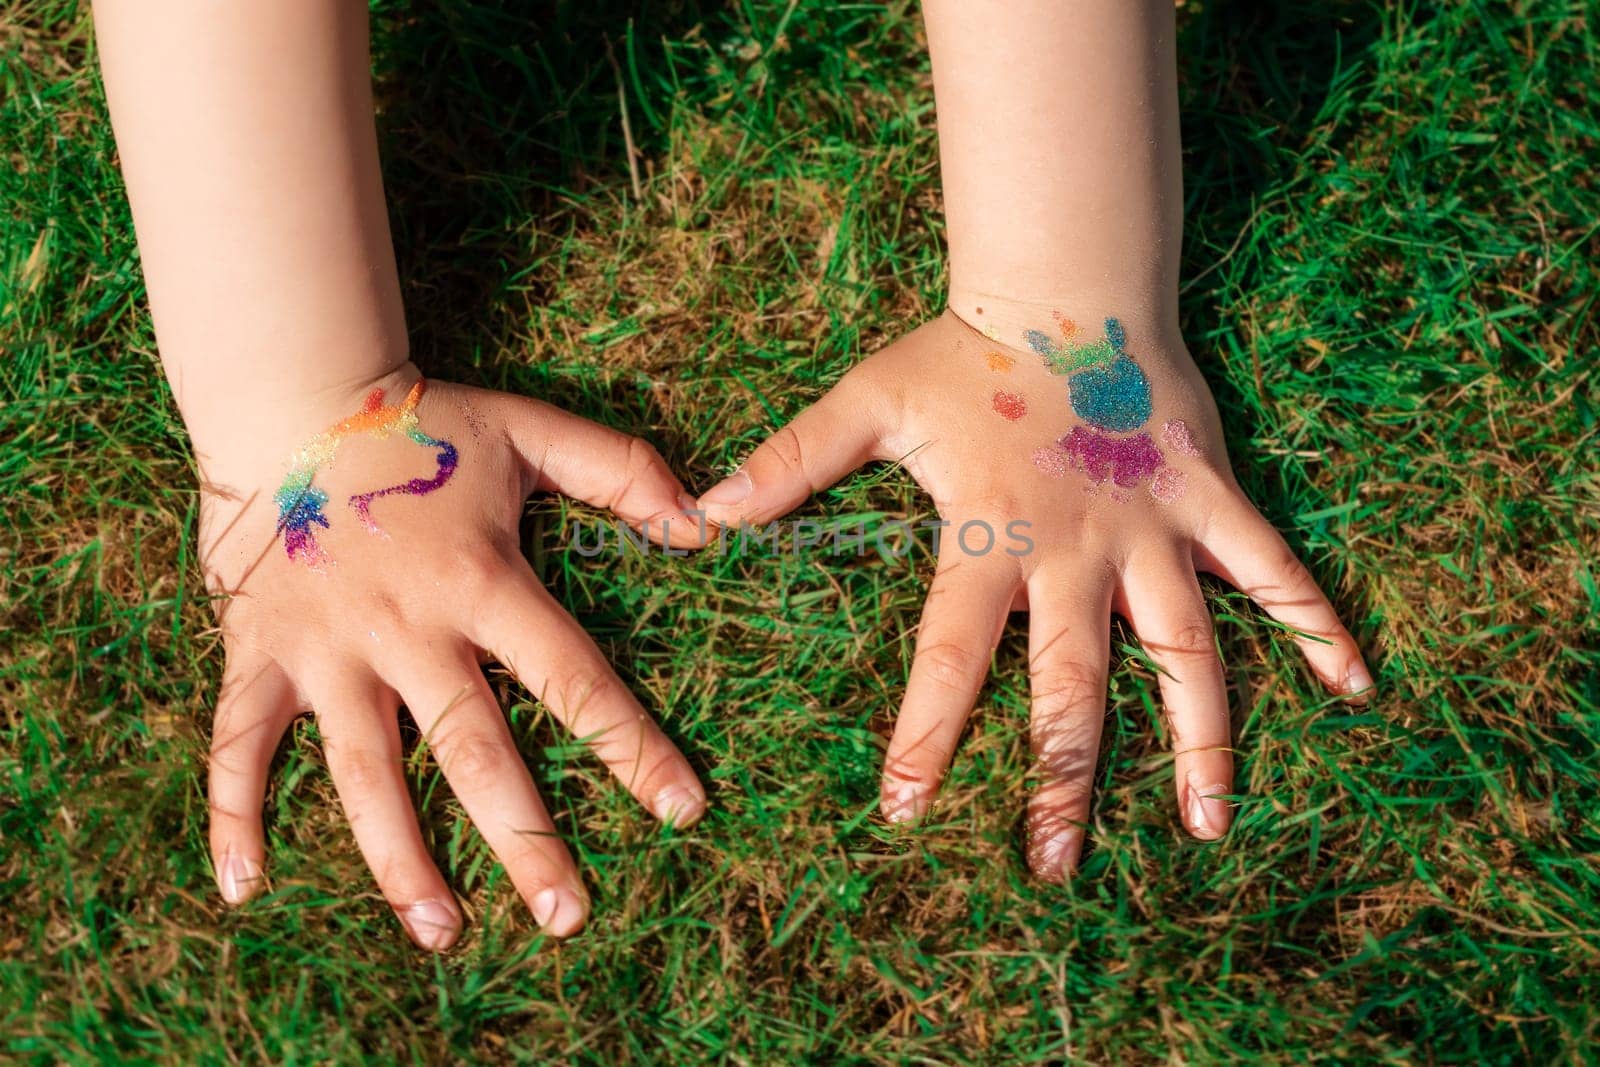 Shimmering sparkling glitter tattoo on a child's hand at a birthday party. Body art